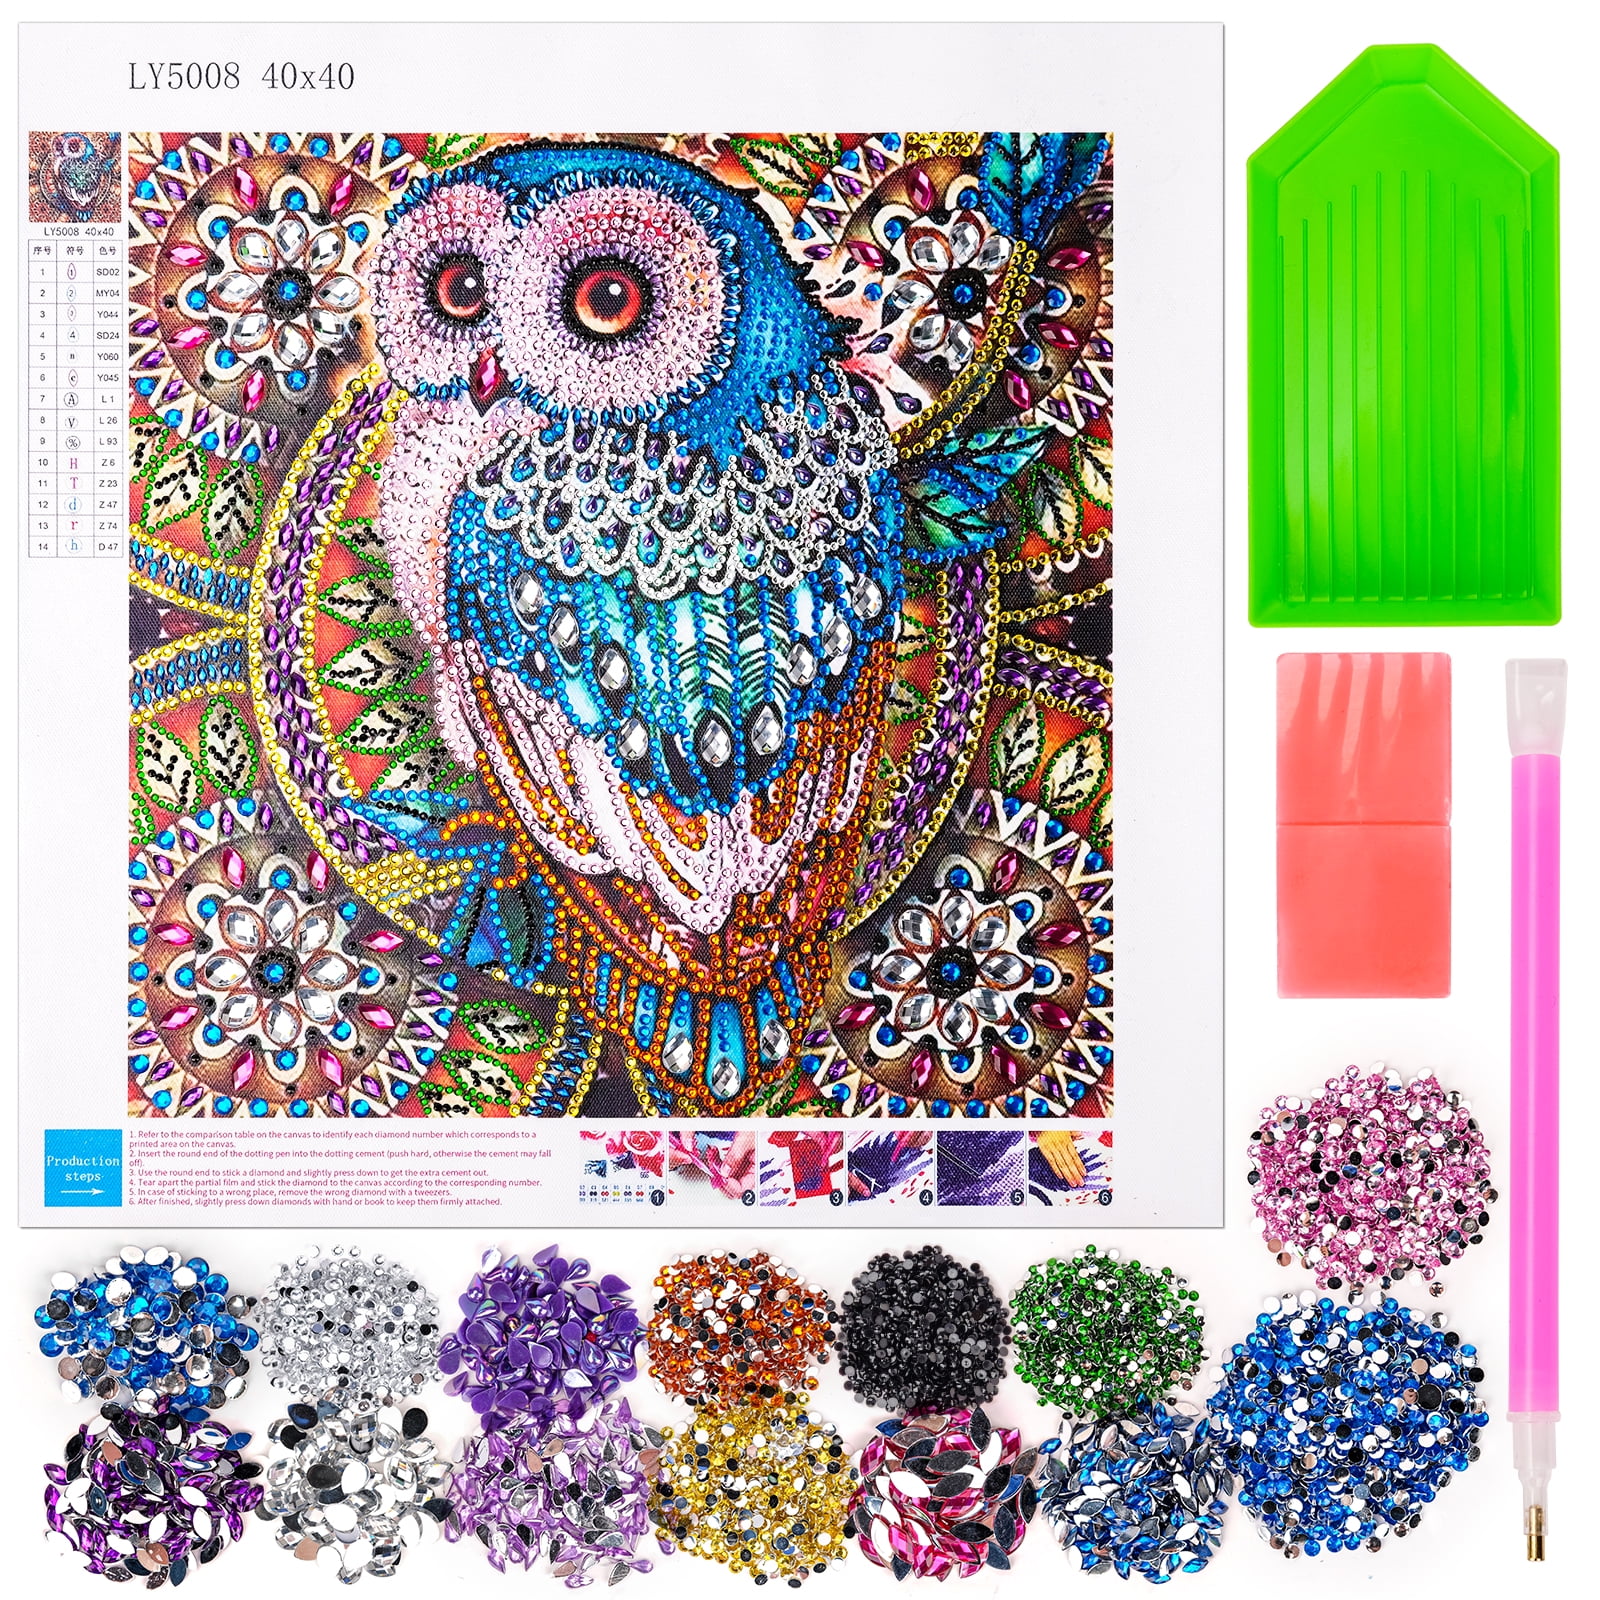 Diamond Painting Kit for Kids Age 6-12 Birthday Gifts for 7 8 9 10 Year Old  Girls Boys 5D Deer Diamond Paint Set with White Frame for Children Adult  DIY Art and